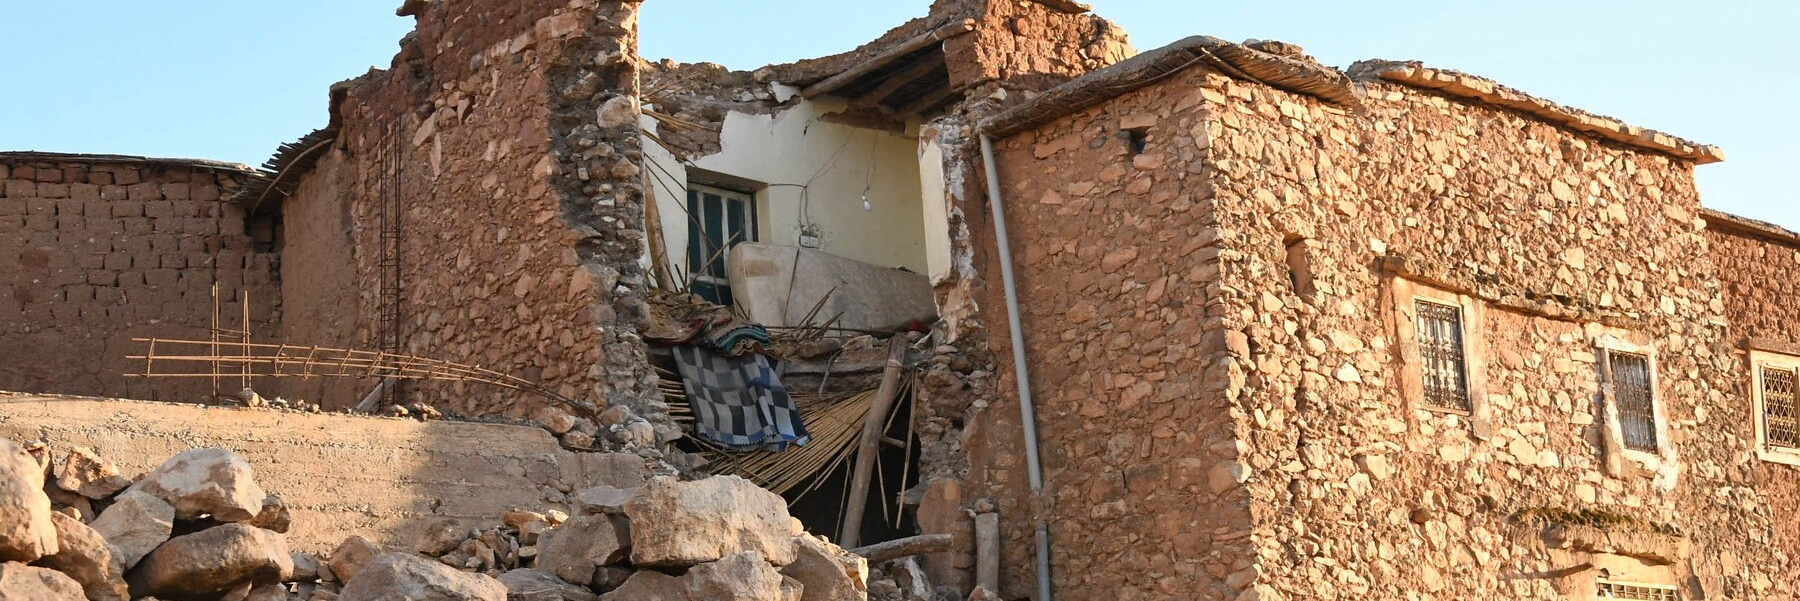 A building in Morocco that has been damaged by the earthquake